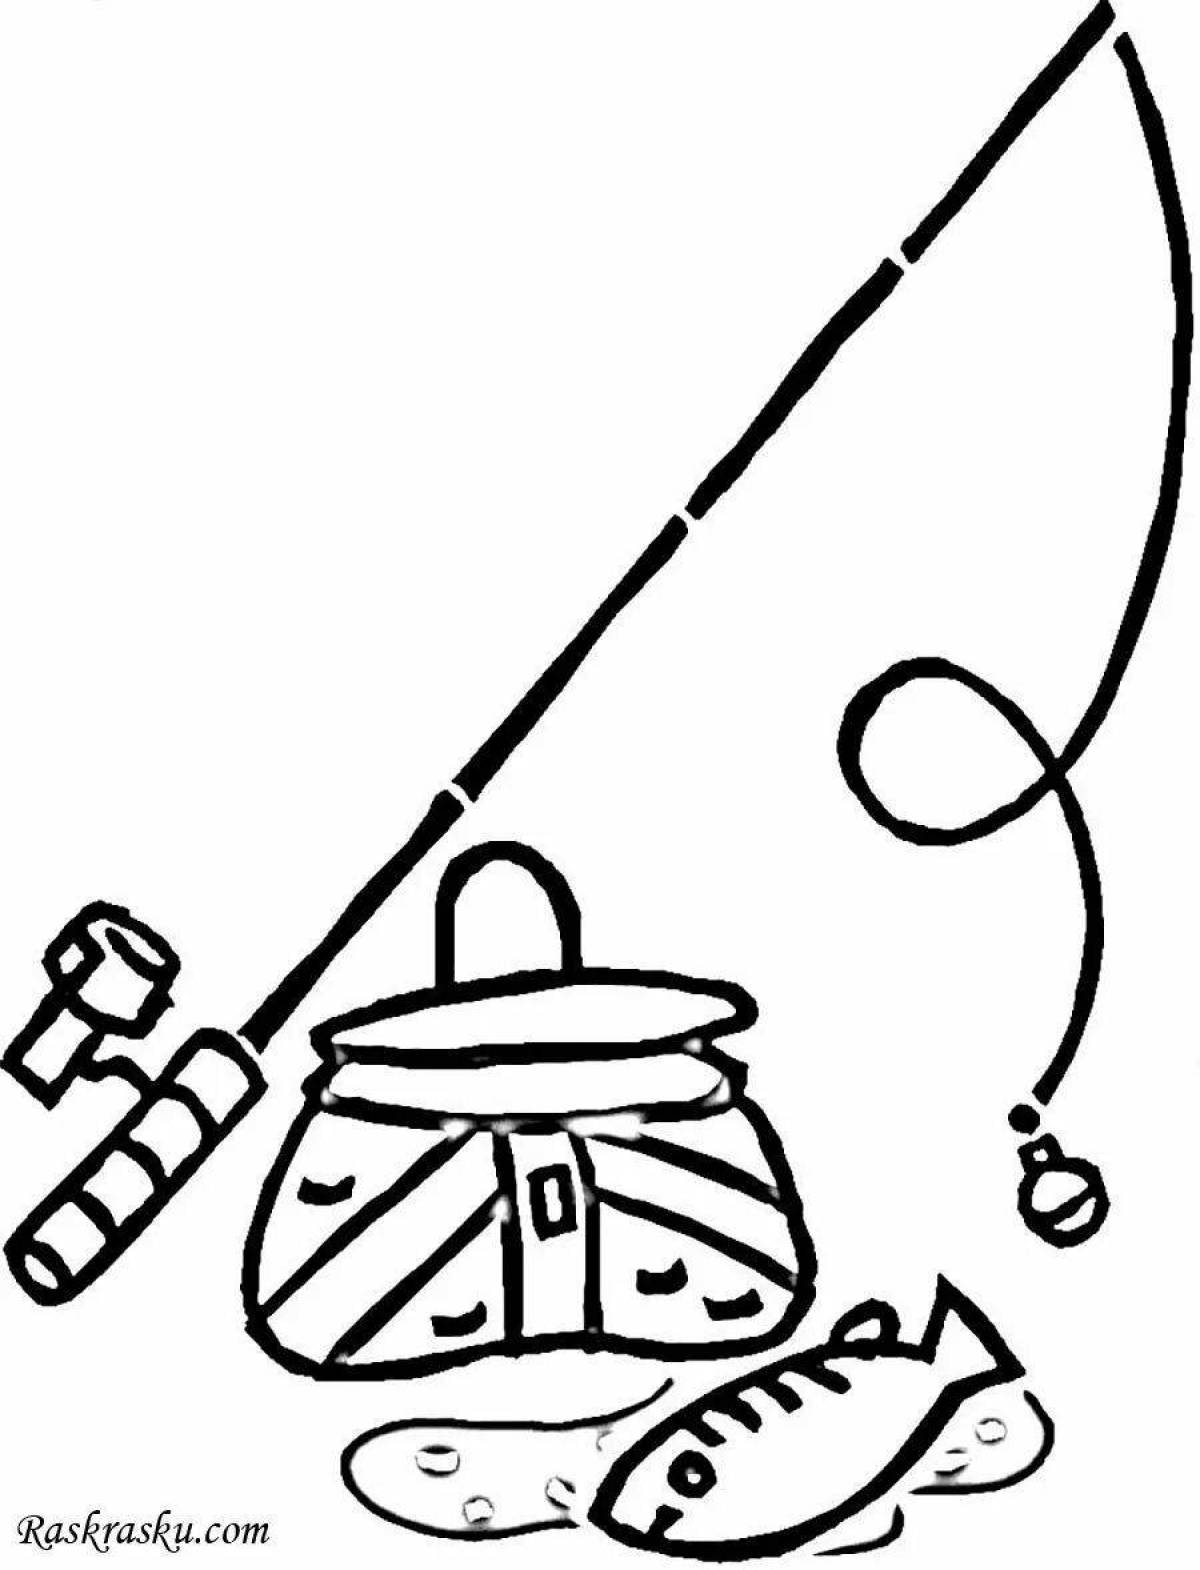 Glorious winter fishing coloring page